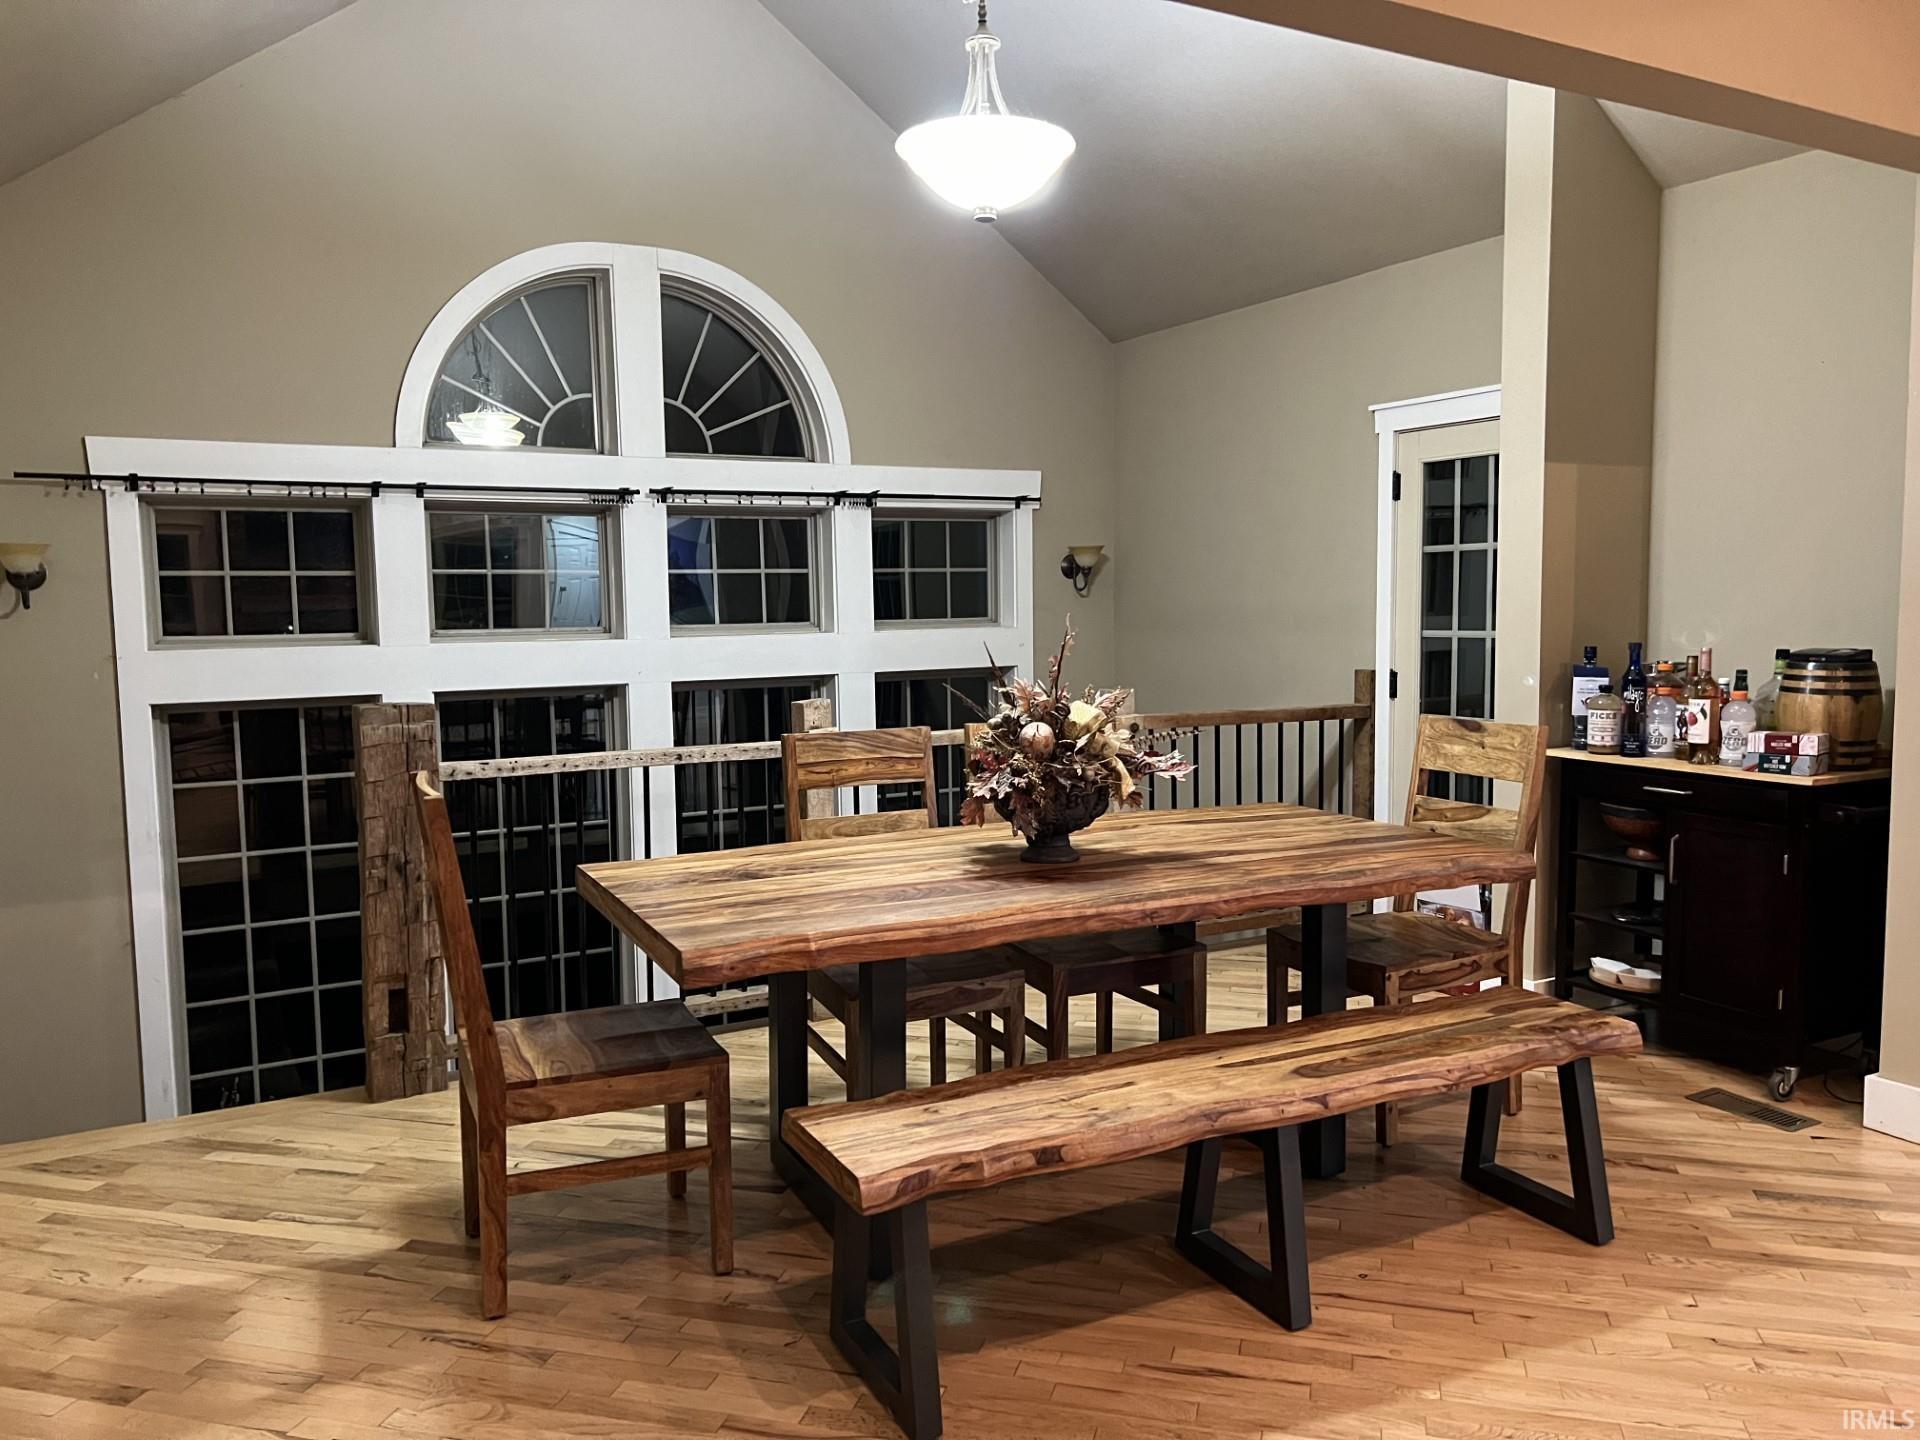 Here you see the farmhouse table seating, perfect for family dining and parties.